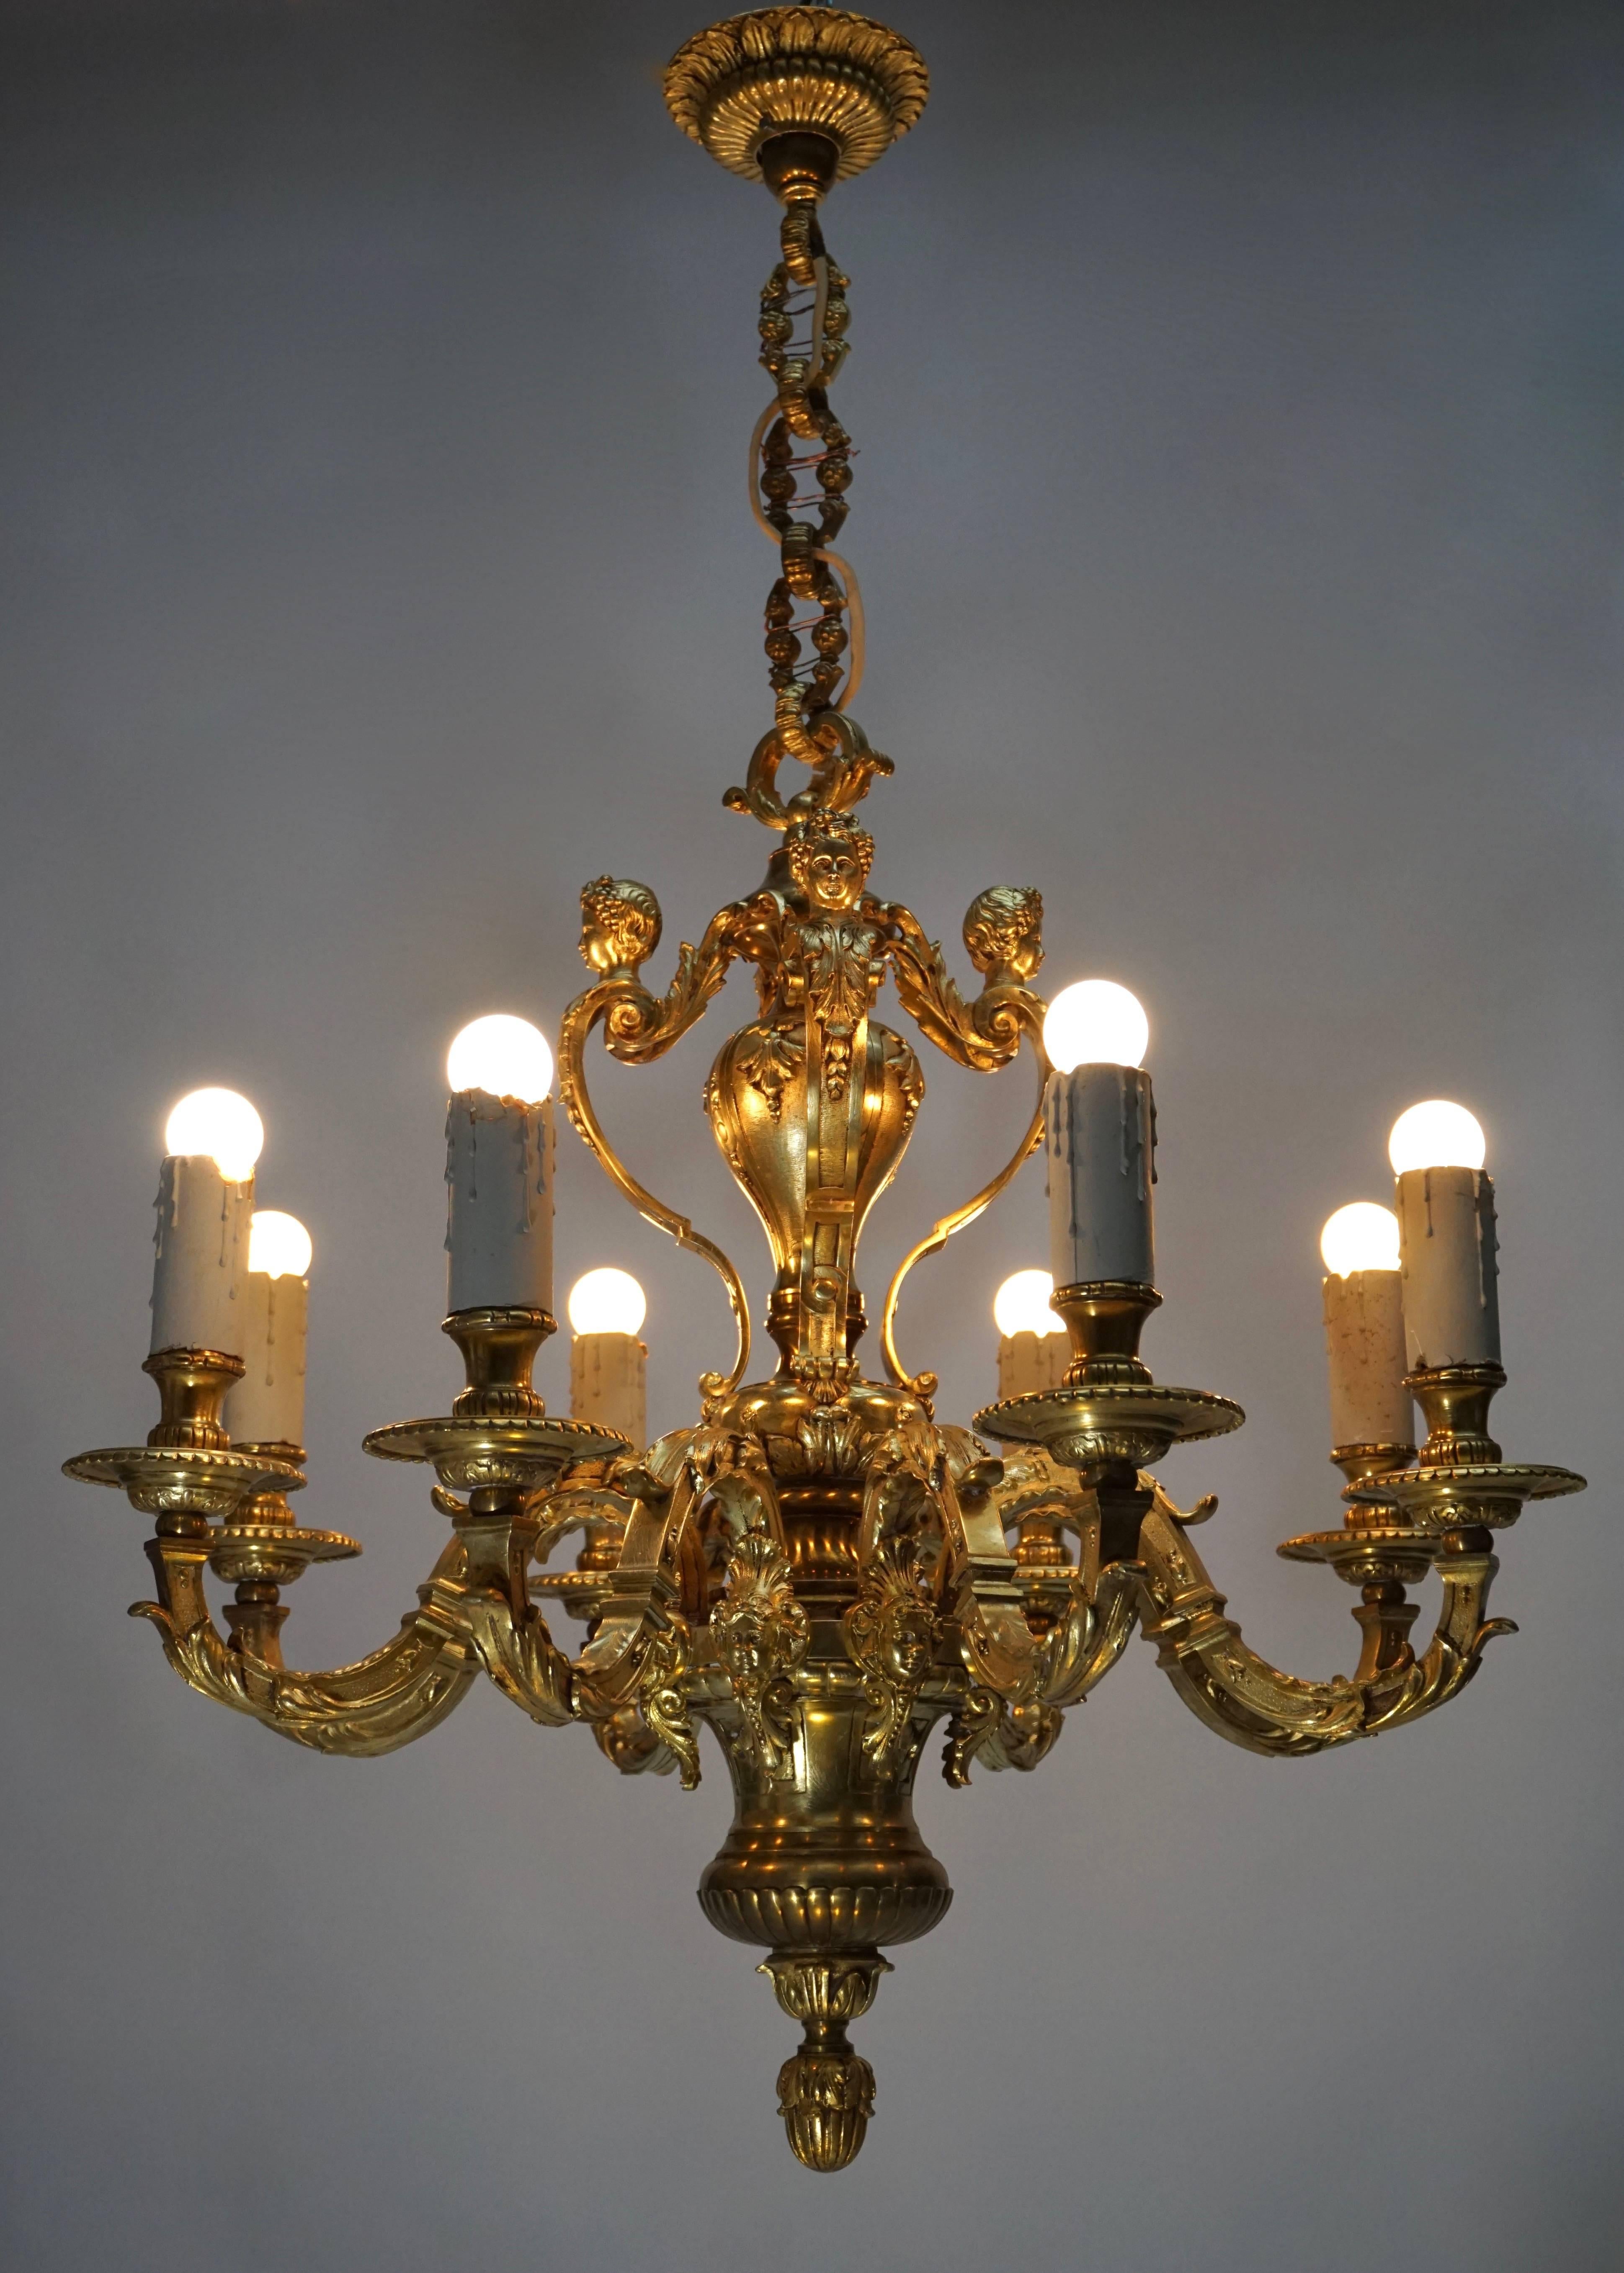 This massive Louis XV style bronze chandelier was created in Avignon, France, circa 1950. The light fixture features four cherubs on the upper part with crossed torches, fleurs de lys and other cartouches and eight angel faces below with scroll